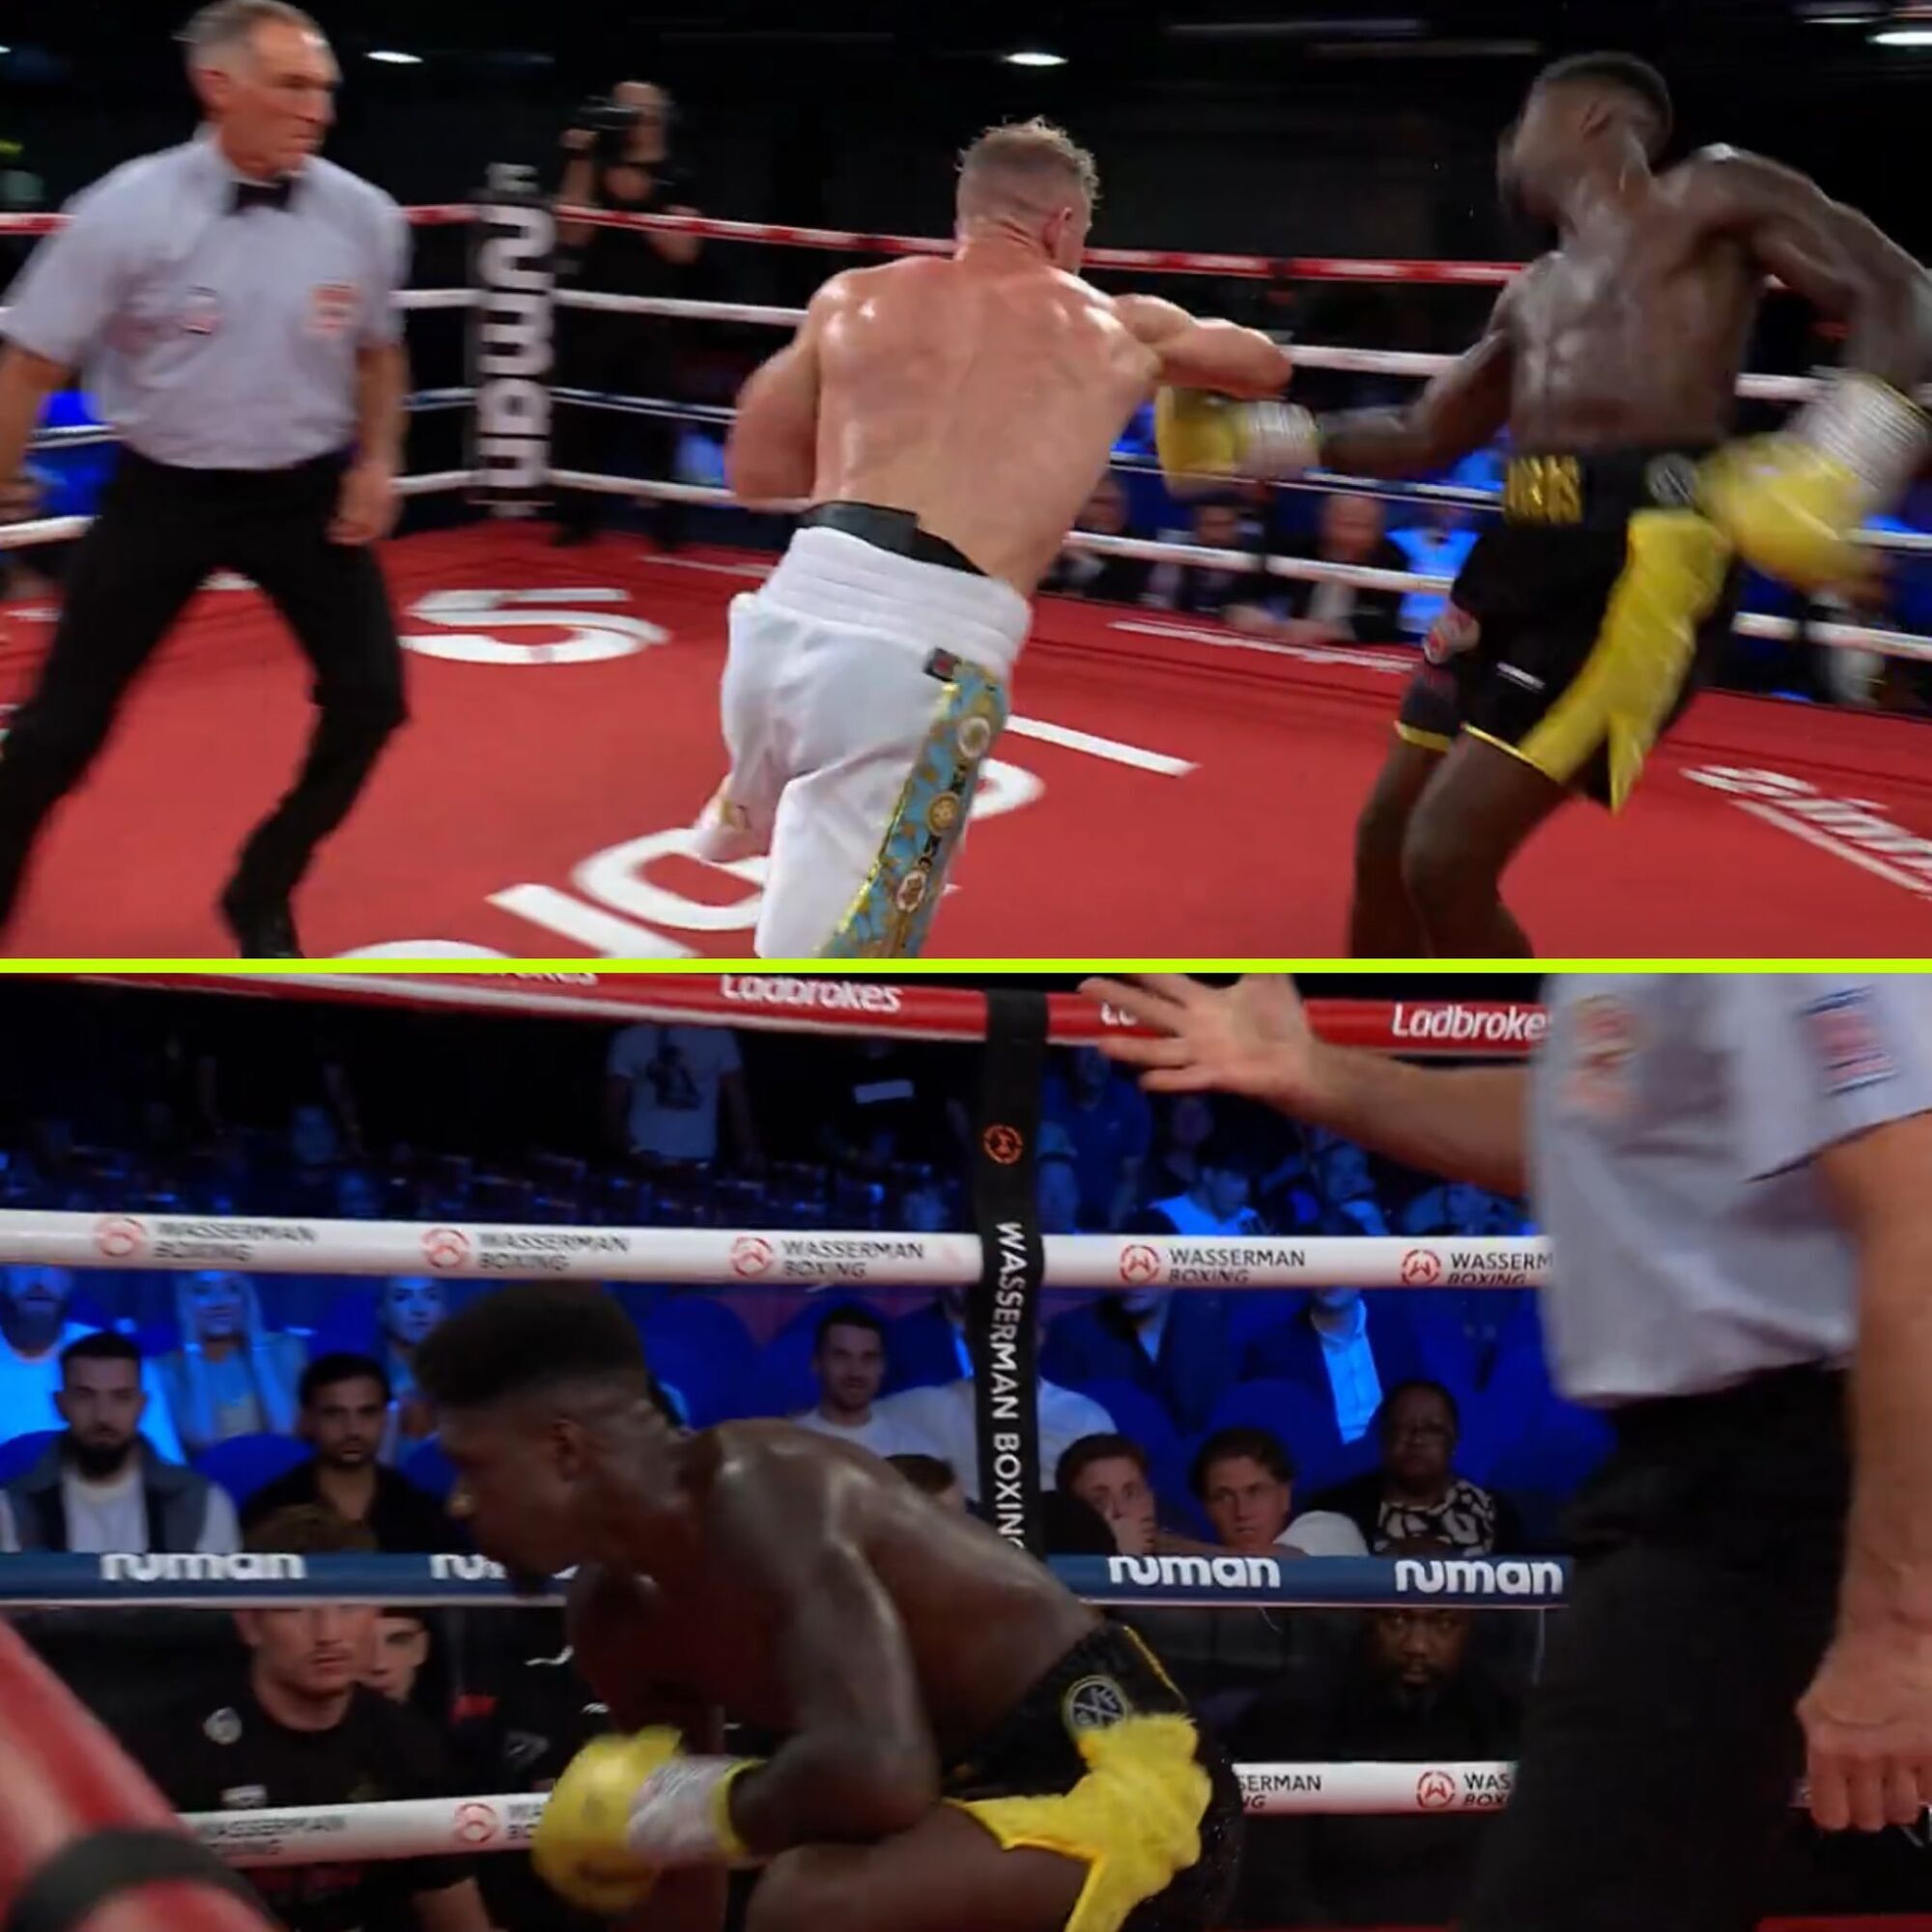 Upset of the year! The undefeated boxer sensationally lost by a heavy knockout in the championship fight. Video